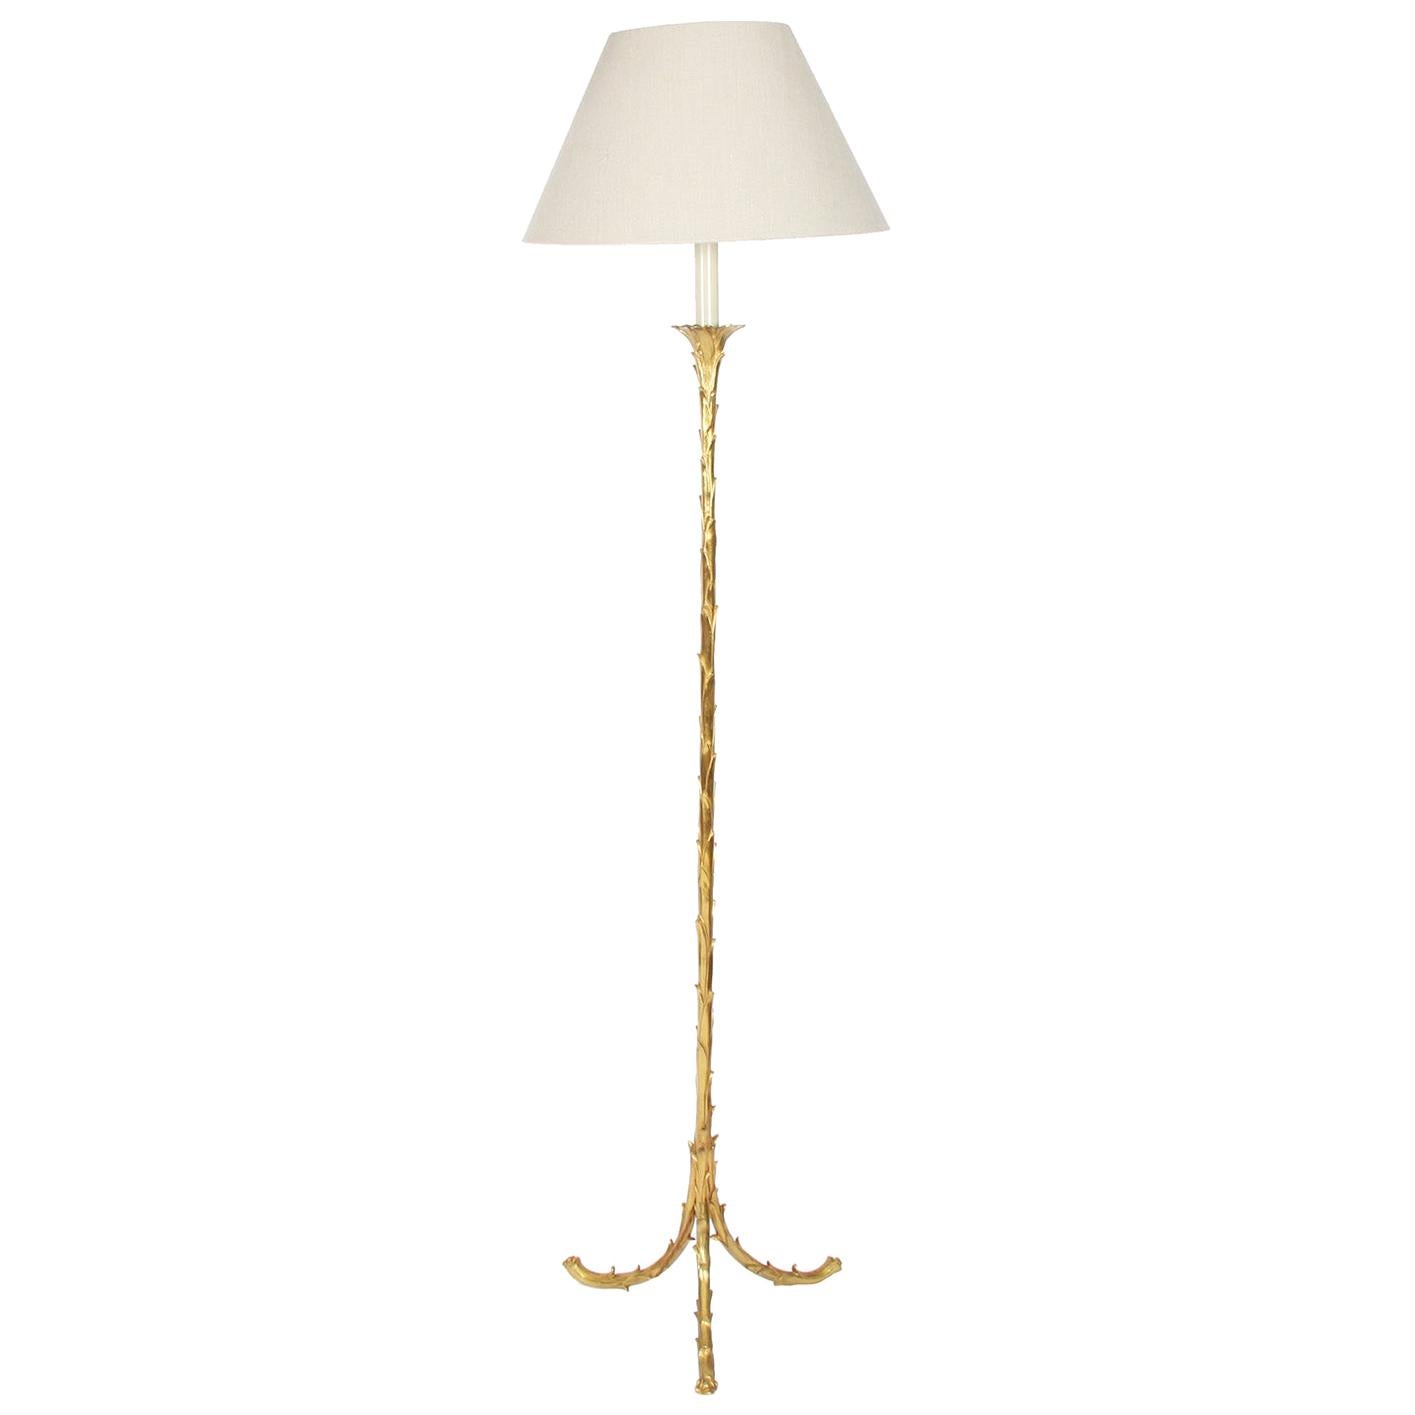 Mid-20th Century French Brass Naturalistic Floor Lamp by Bagues For Sale